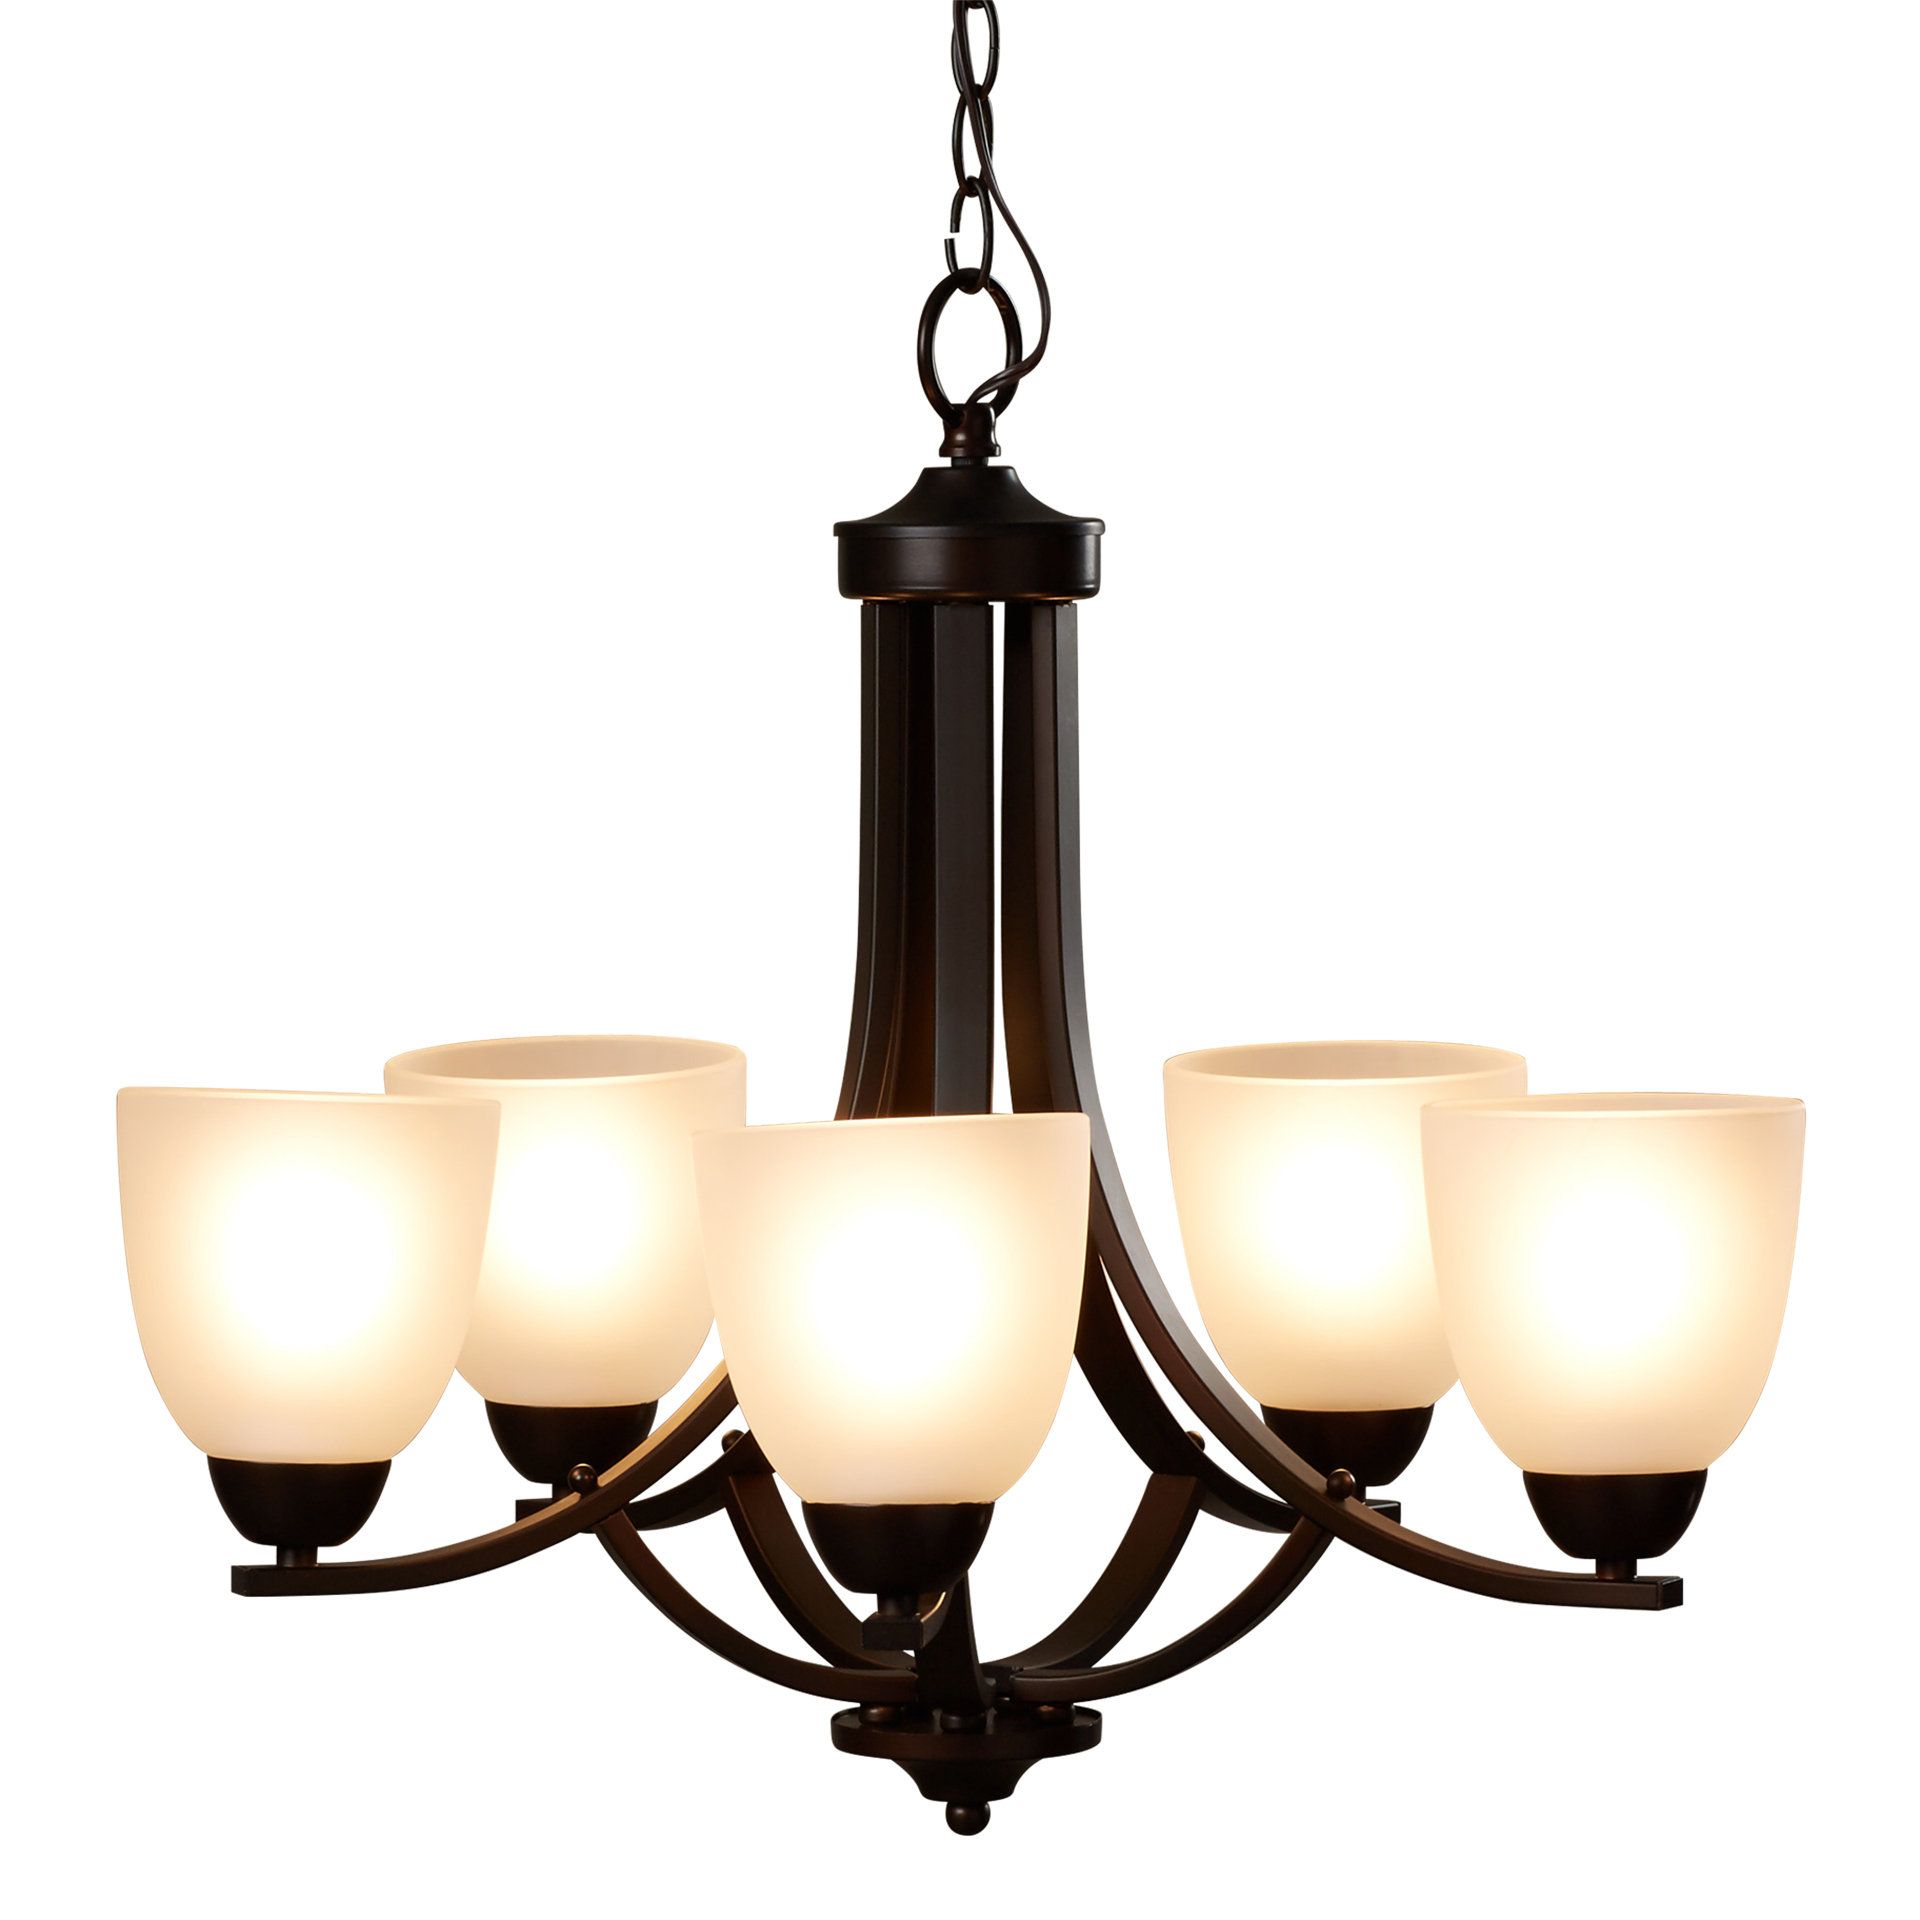 Hayden 5 Light Shaded Chandelier Throughout Newent 3 Light Single Bowl Pendants (View 16 of 30)